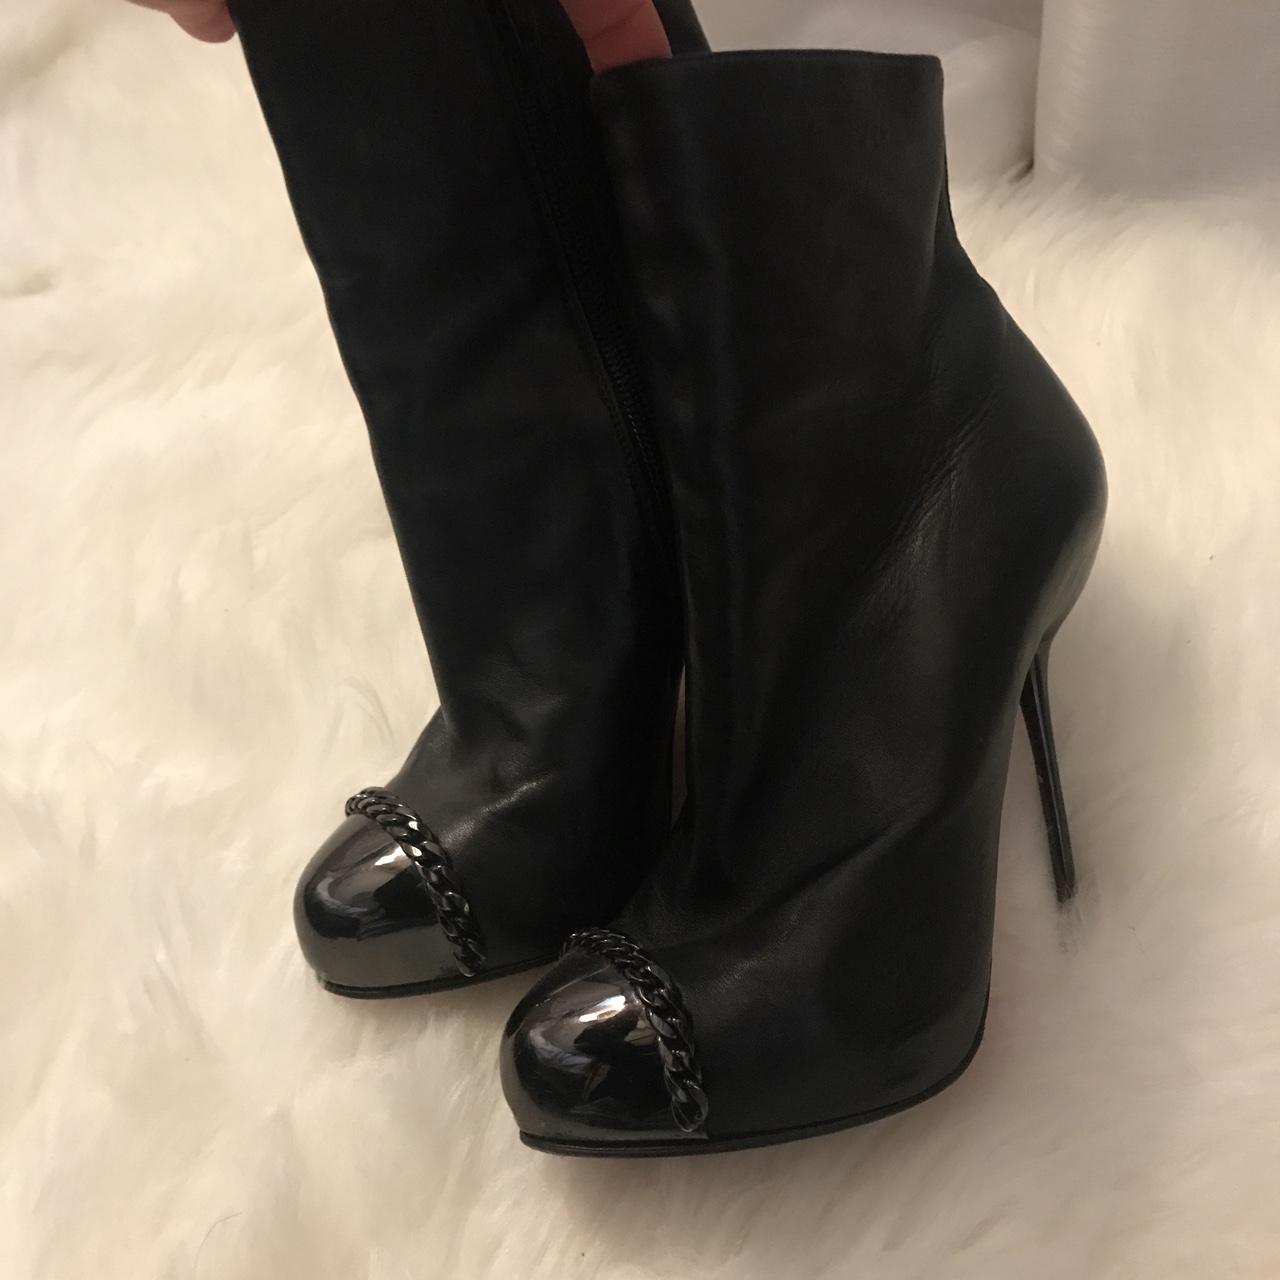 CL leather ankle boots, thin nail metal heel, metal... - Depop